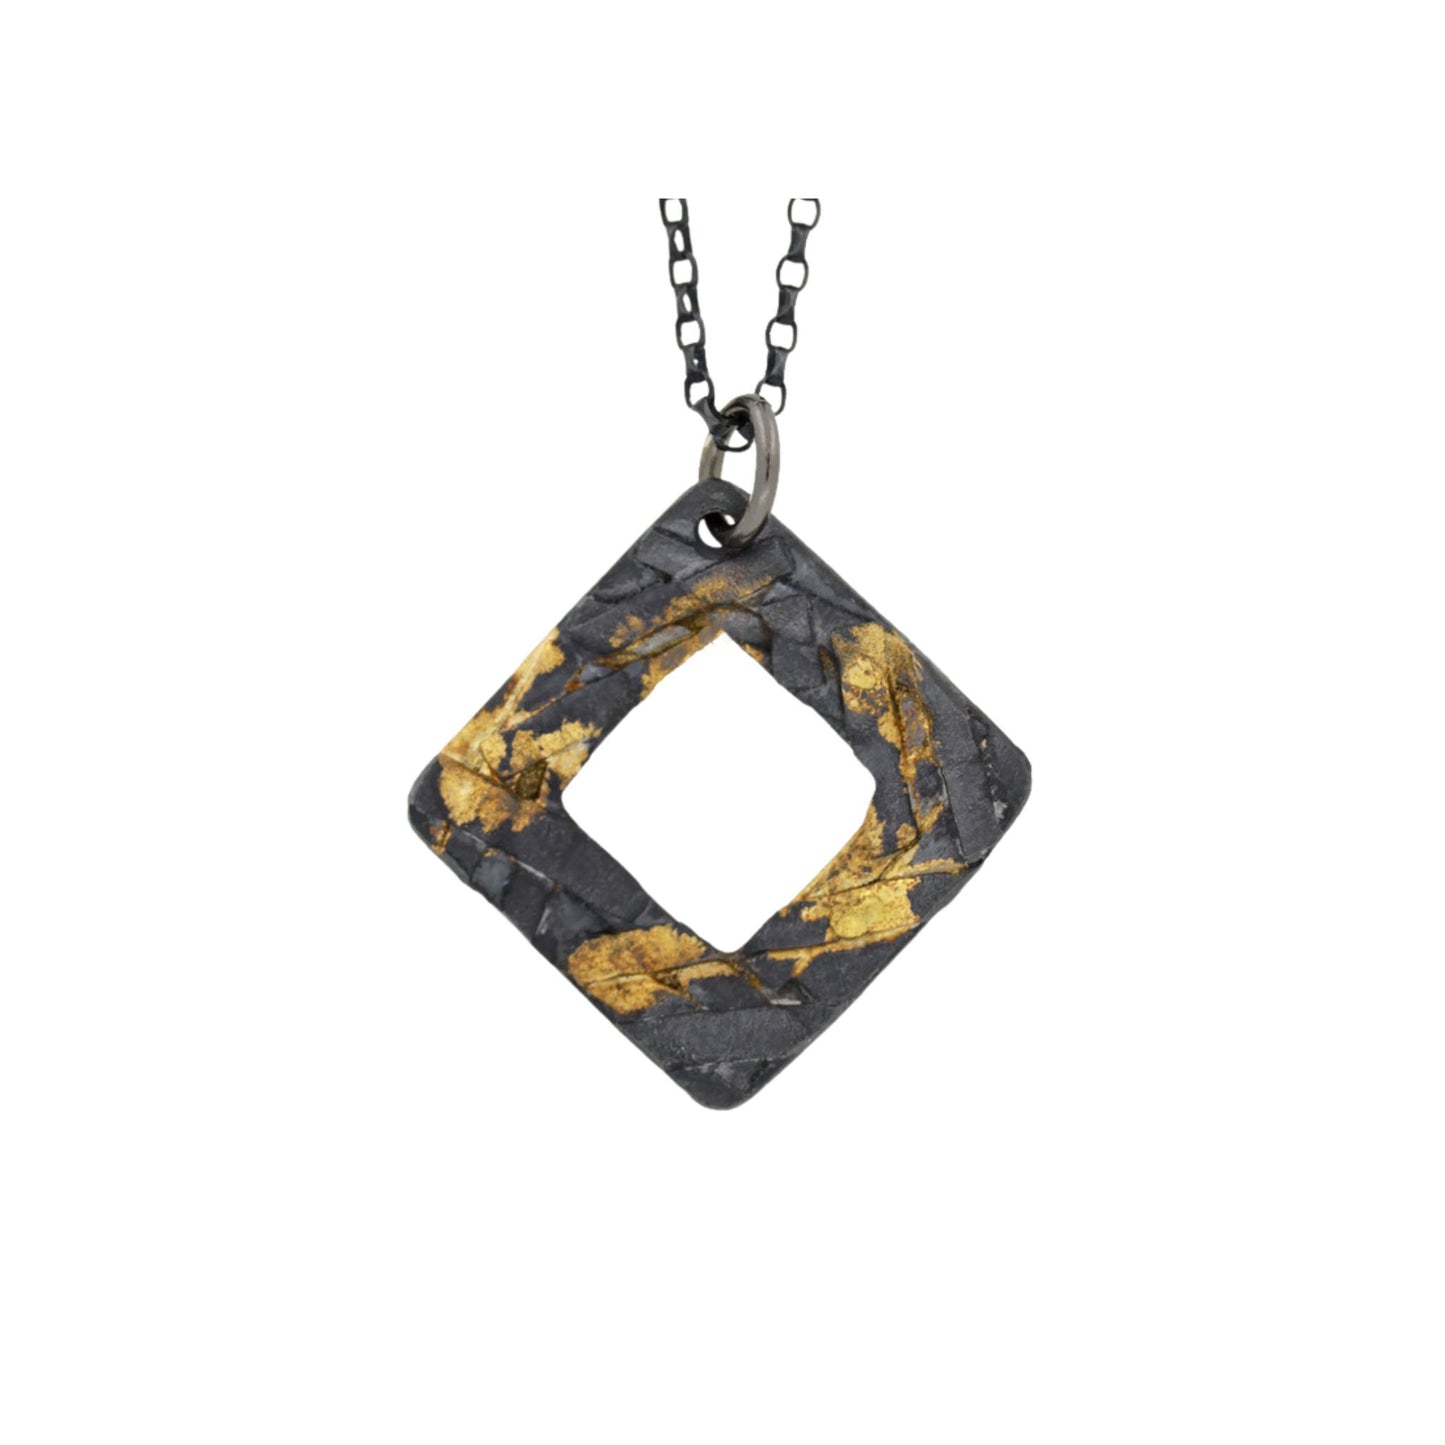 Oxidized silver and gold square washer necklace